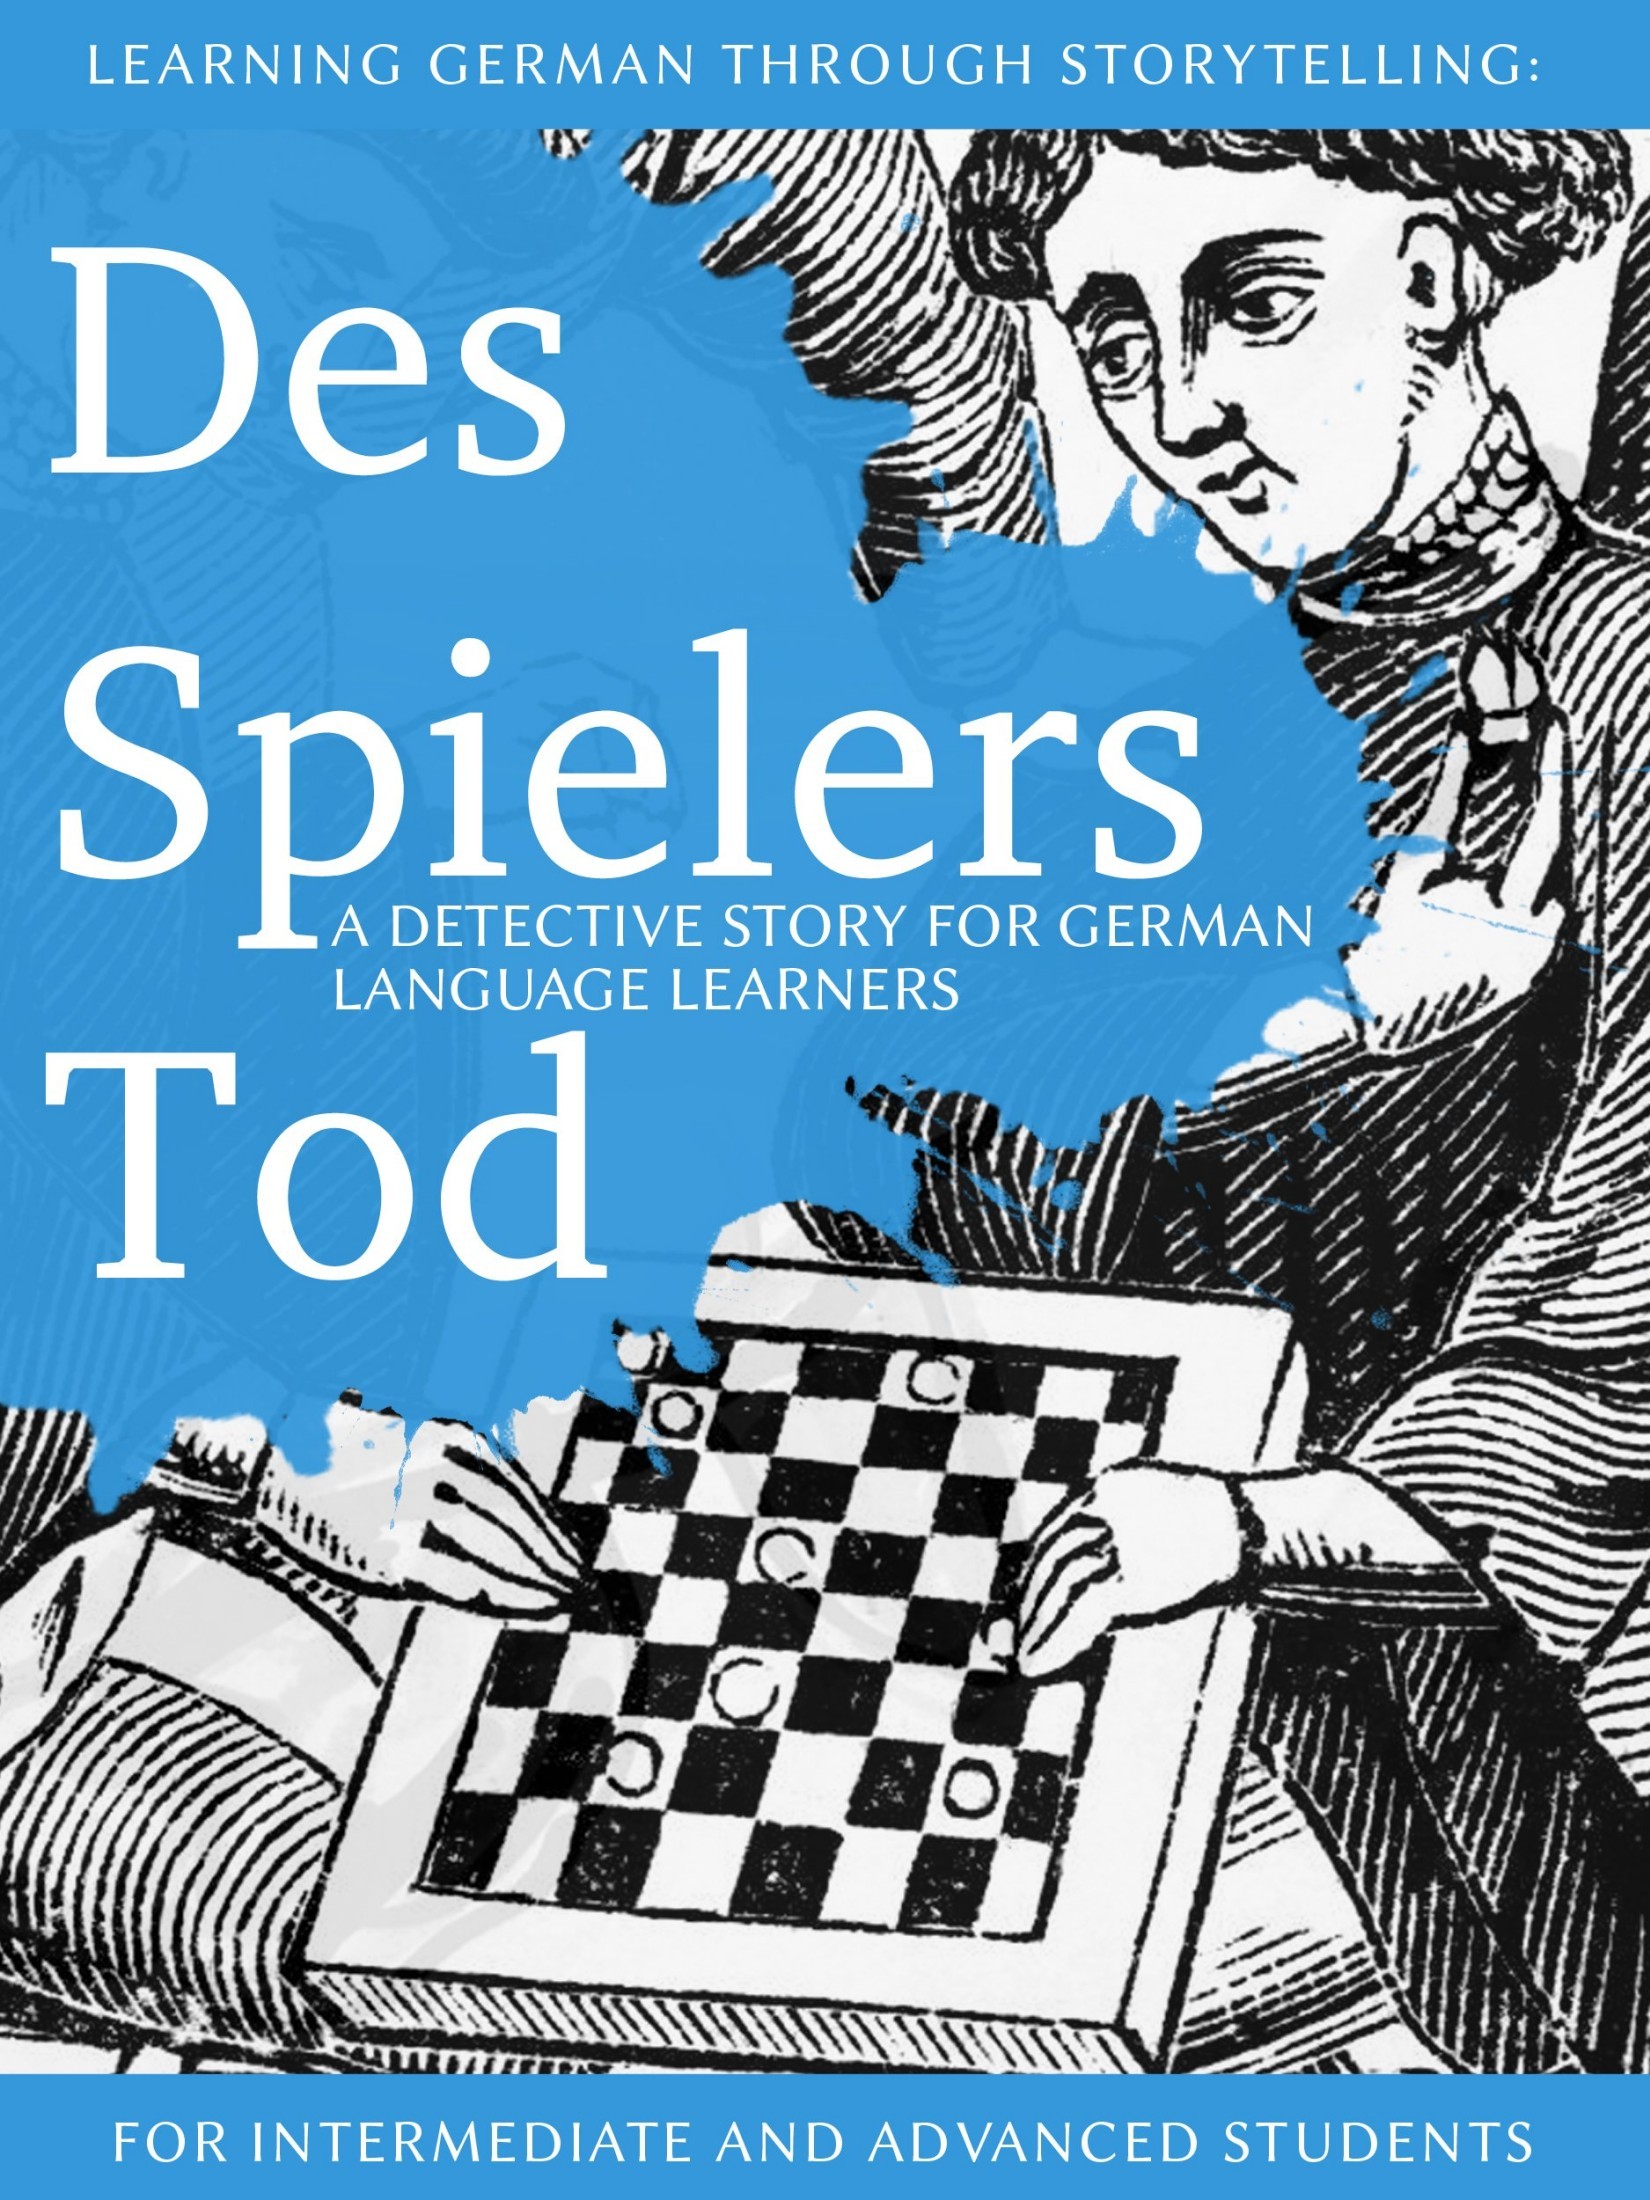 Learning German Through Storytelling: des Spielers Tod - a Detective Story for German Language Learners (includes Exercises): For Intermediate and Advanced Learners